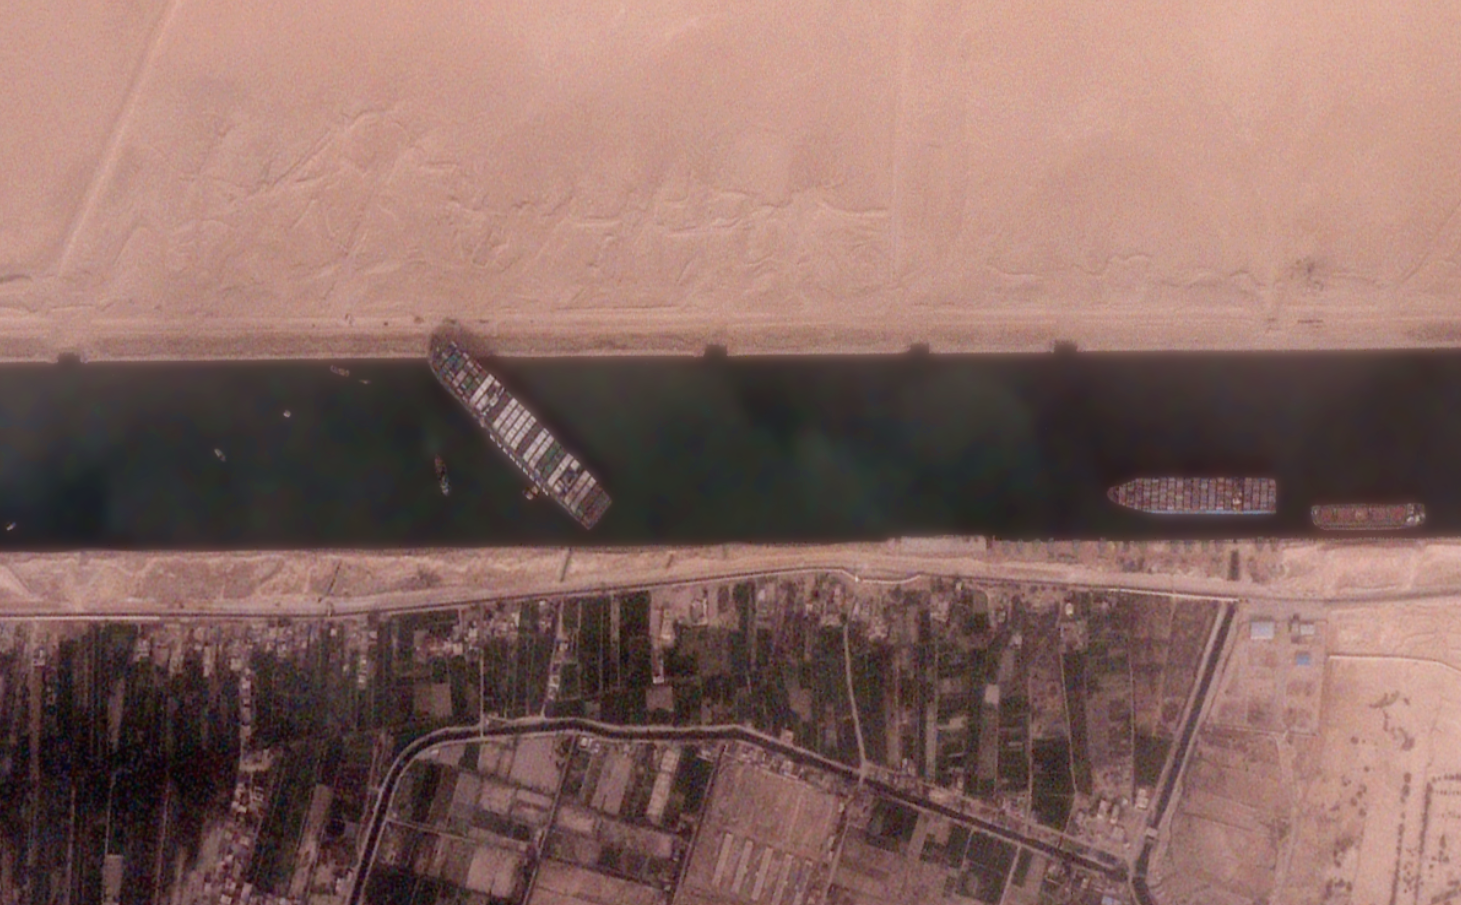 Giant Boxship Ever Given Could Block Suez Canal for "Weeks"